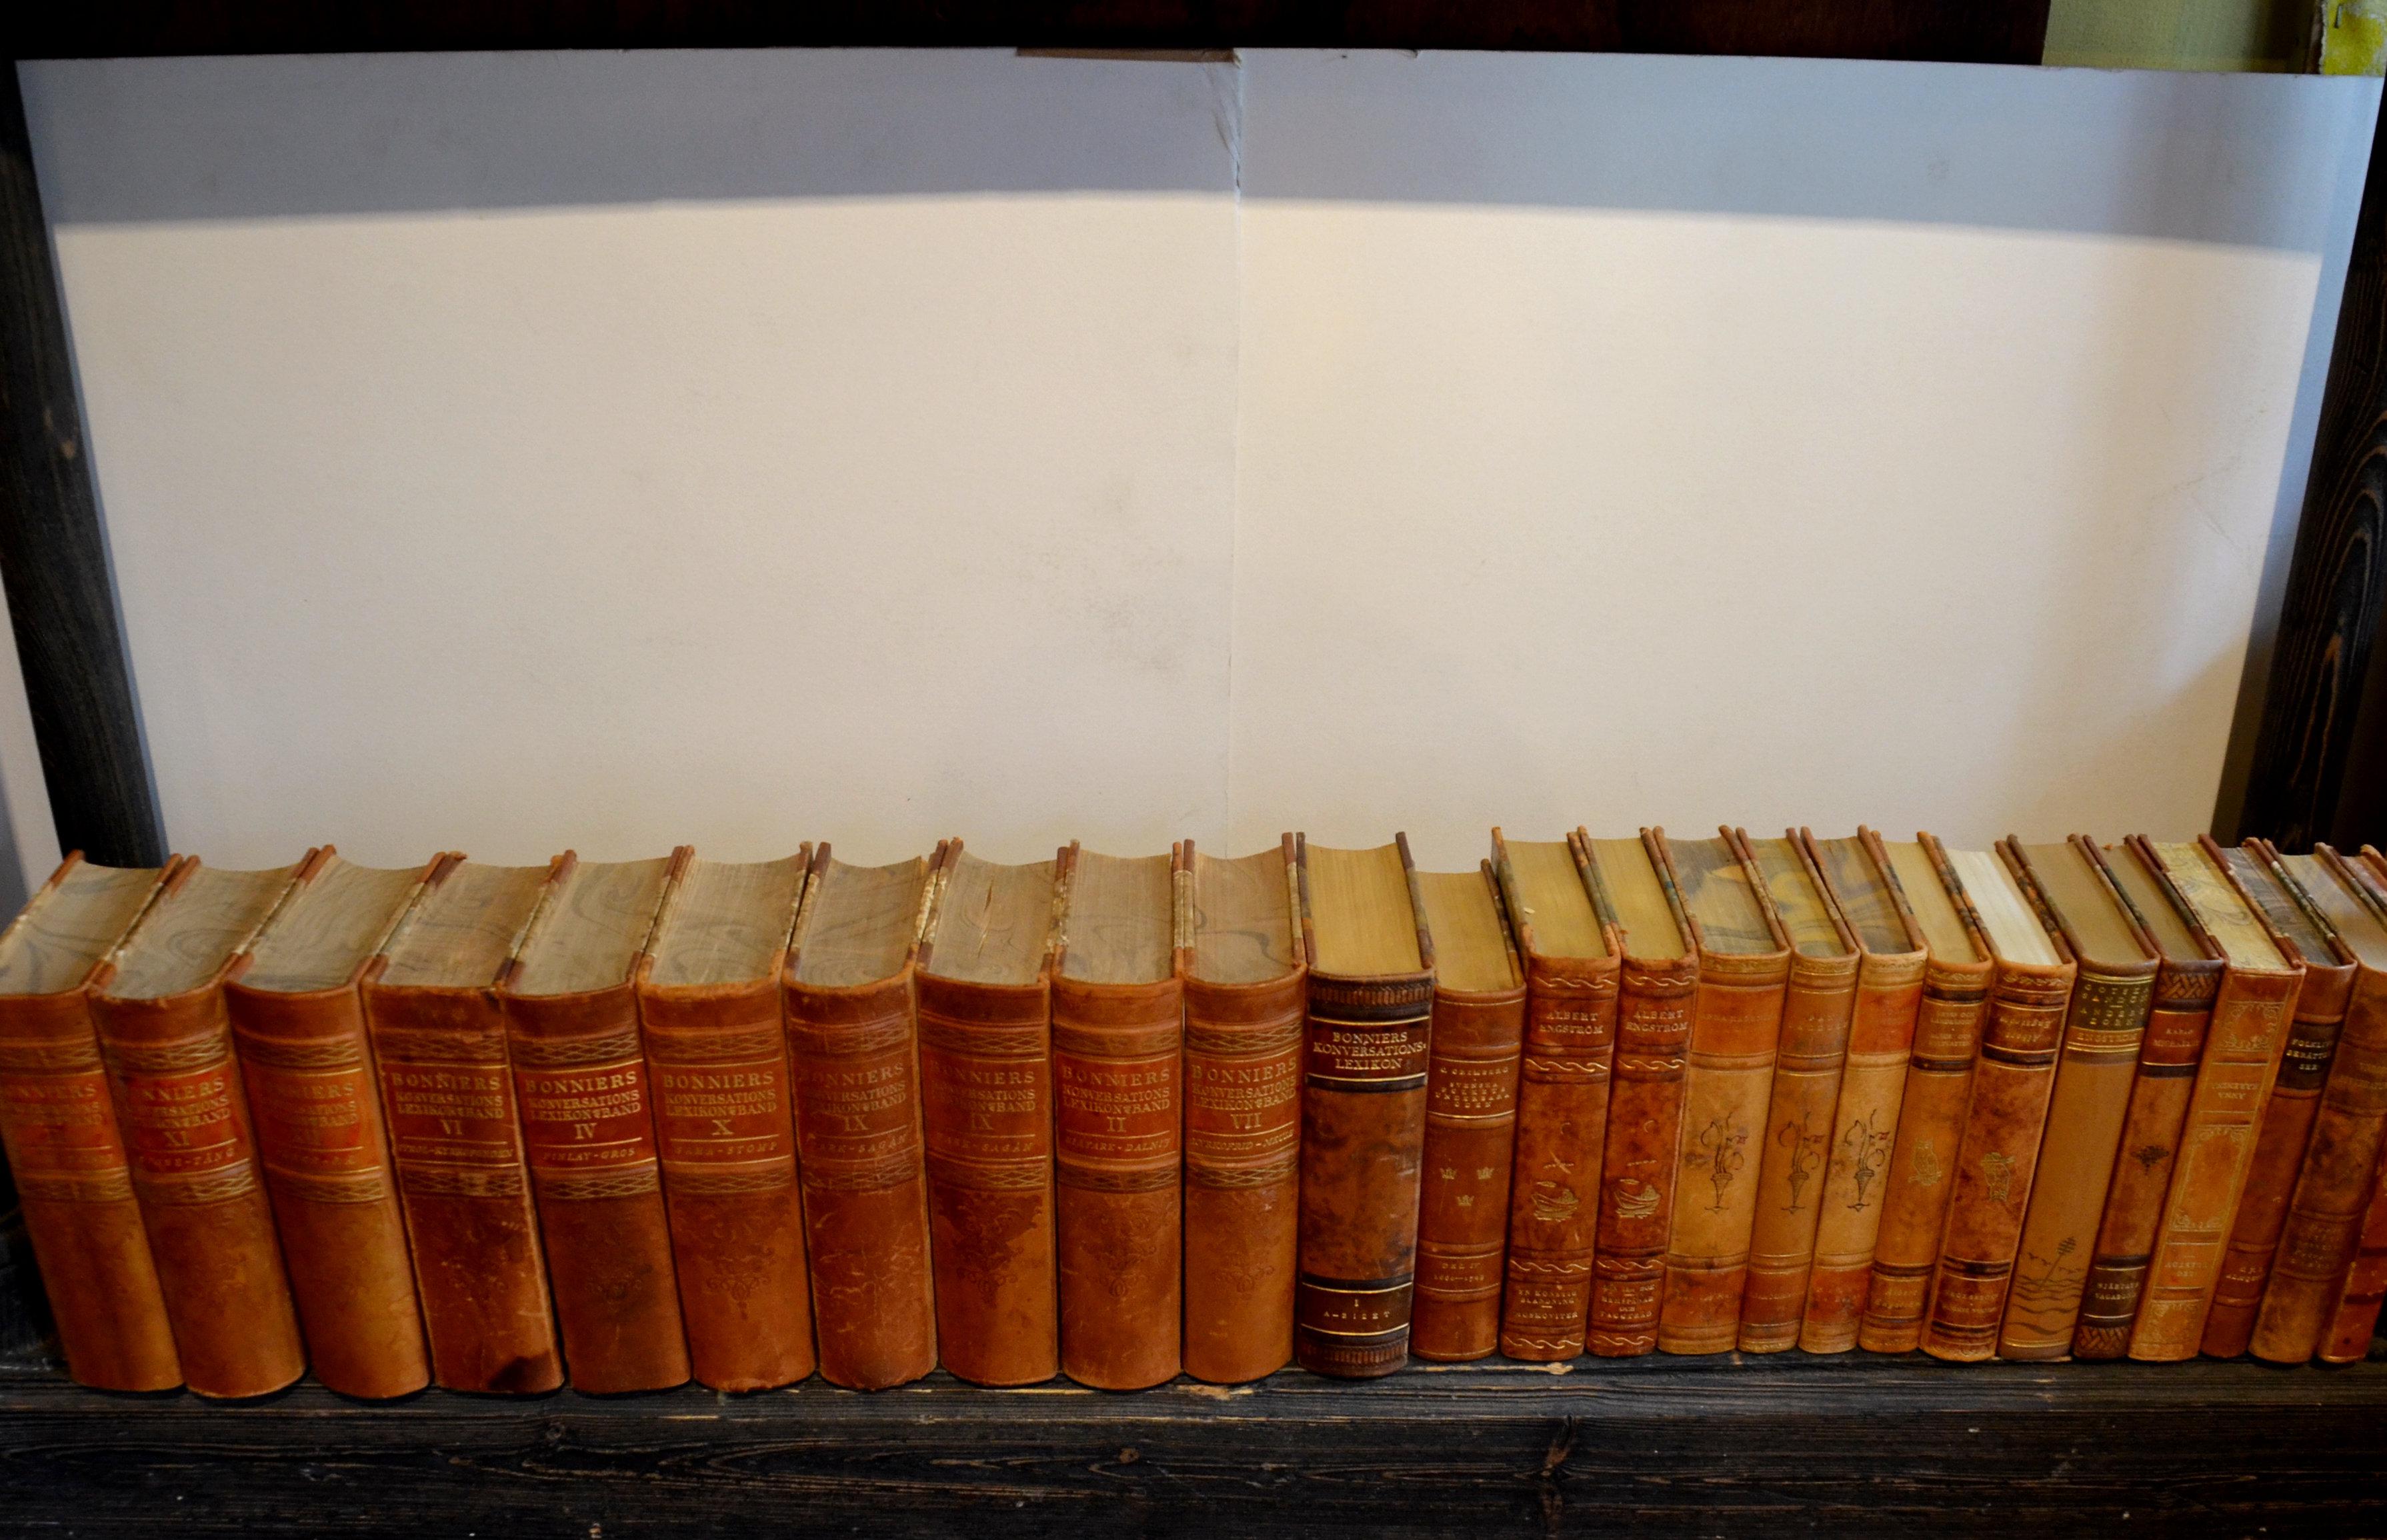 One metre of leather-bound Swedish books containing 25 books.